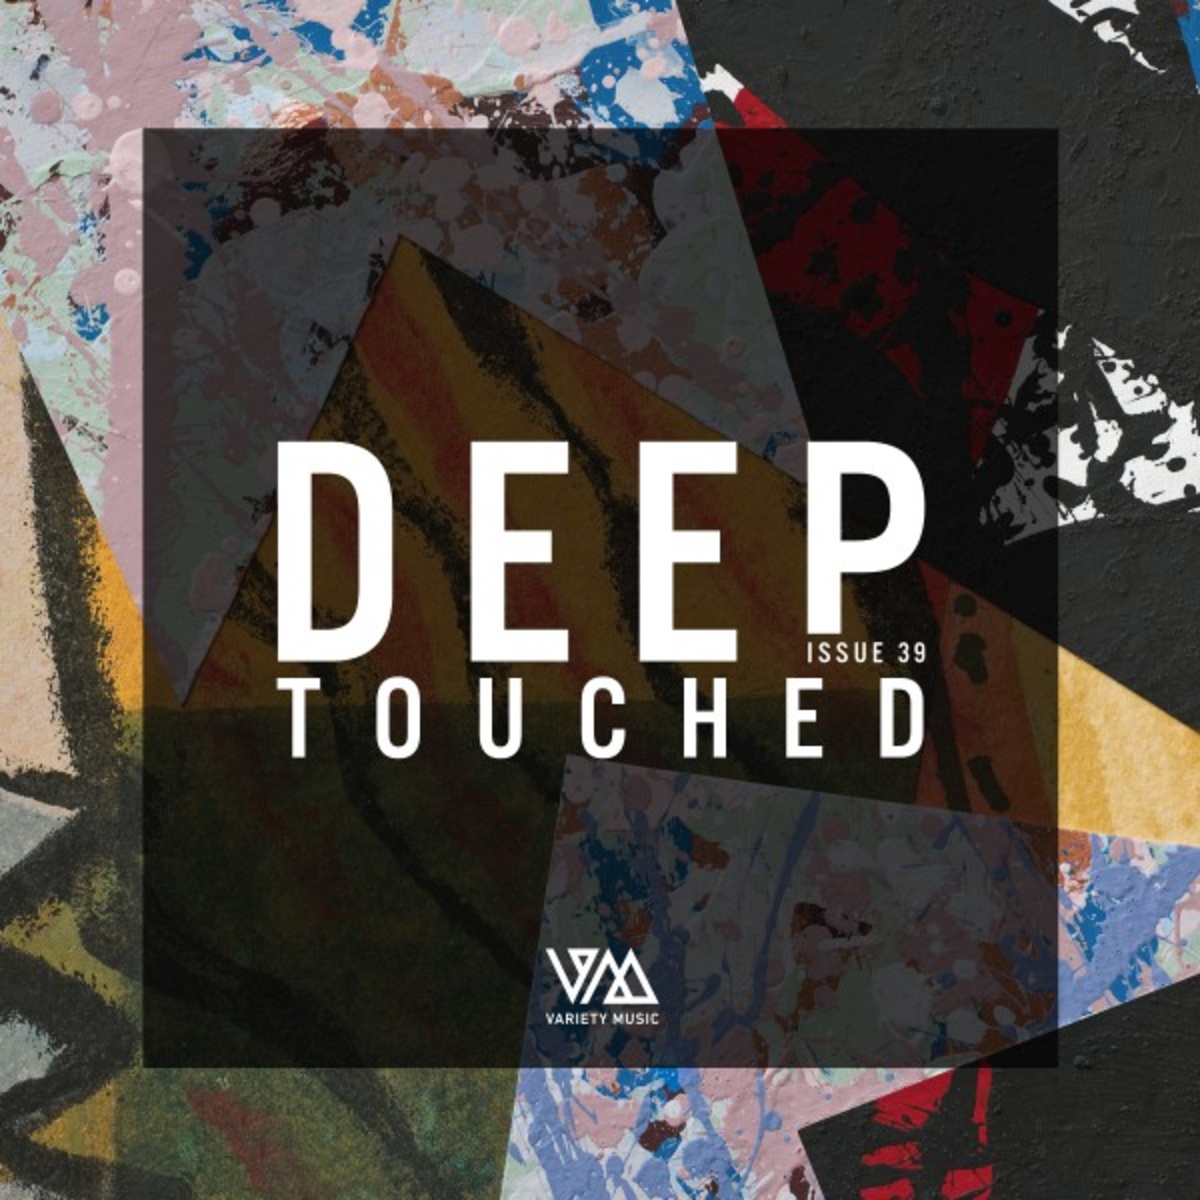 VA - Deep Touched Issue 39 / Variety Music